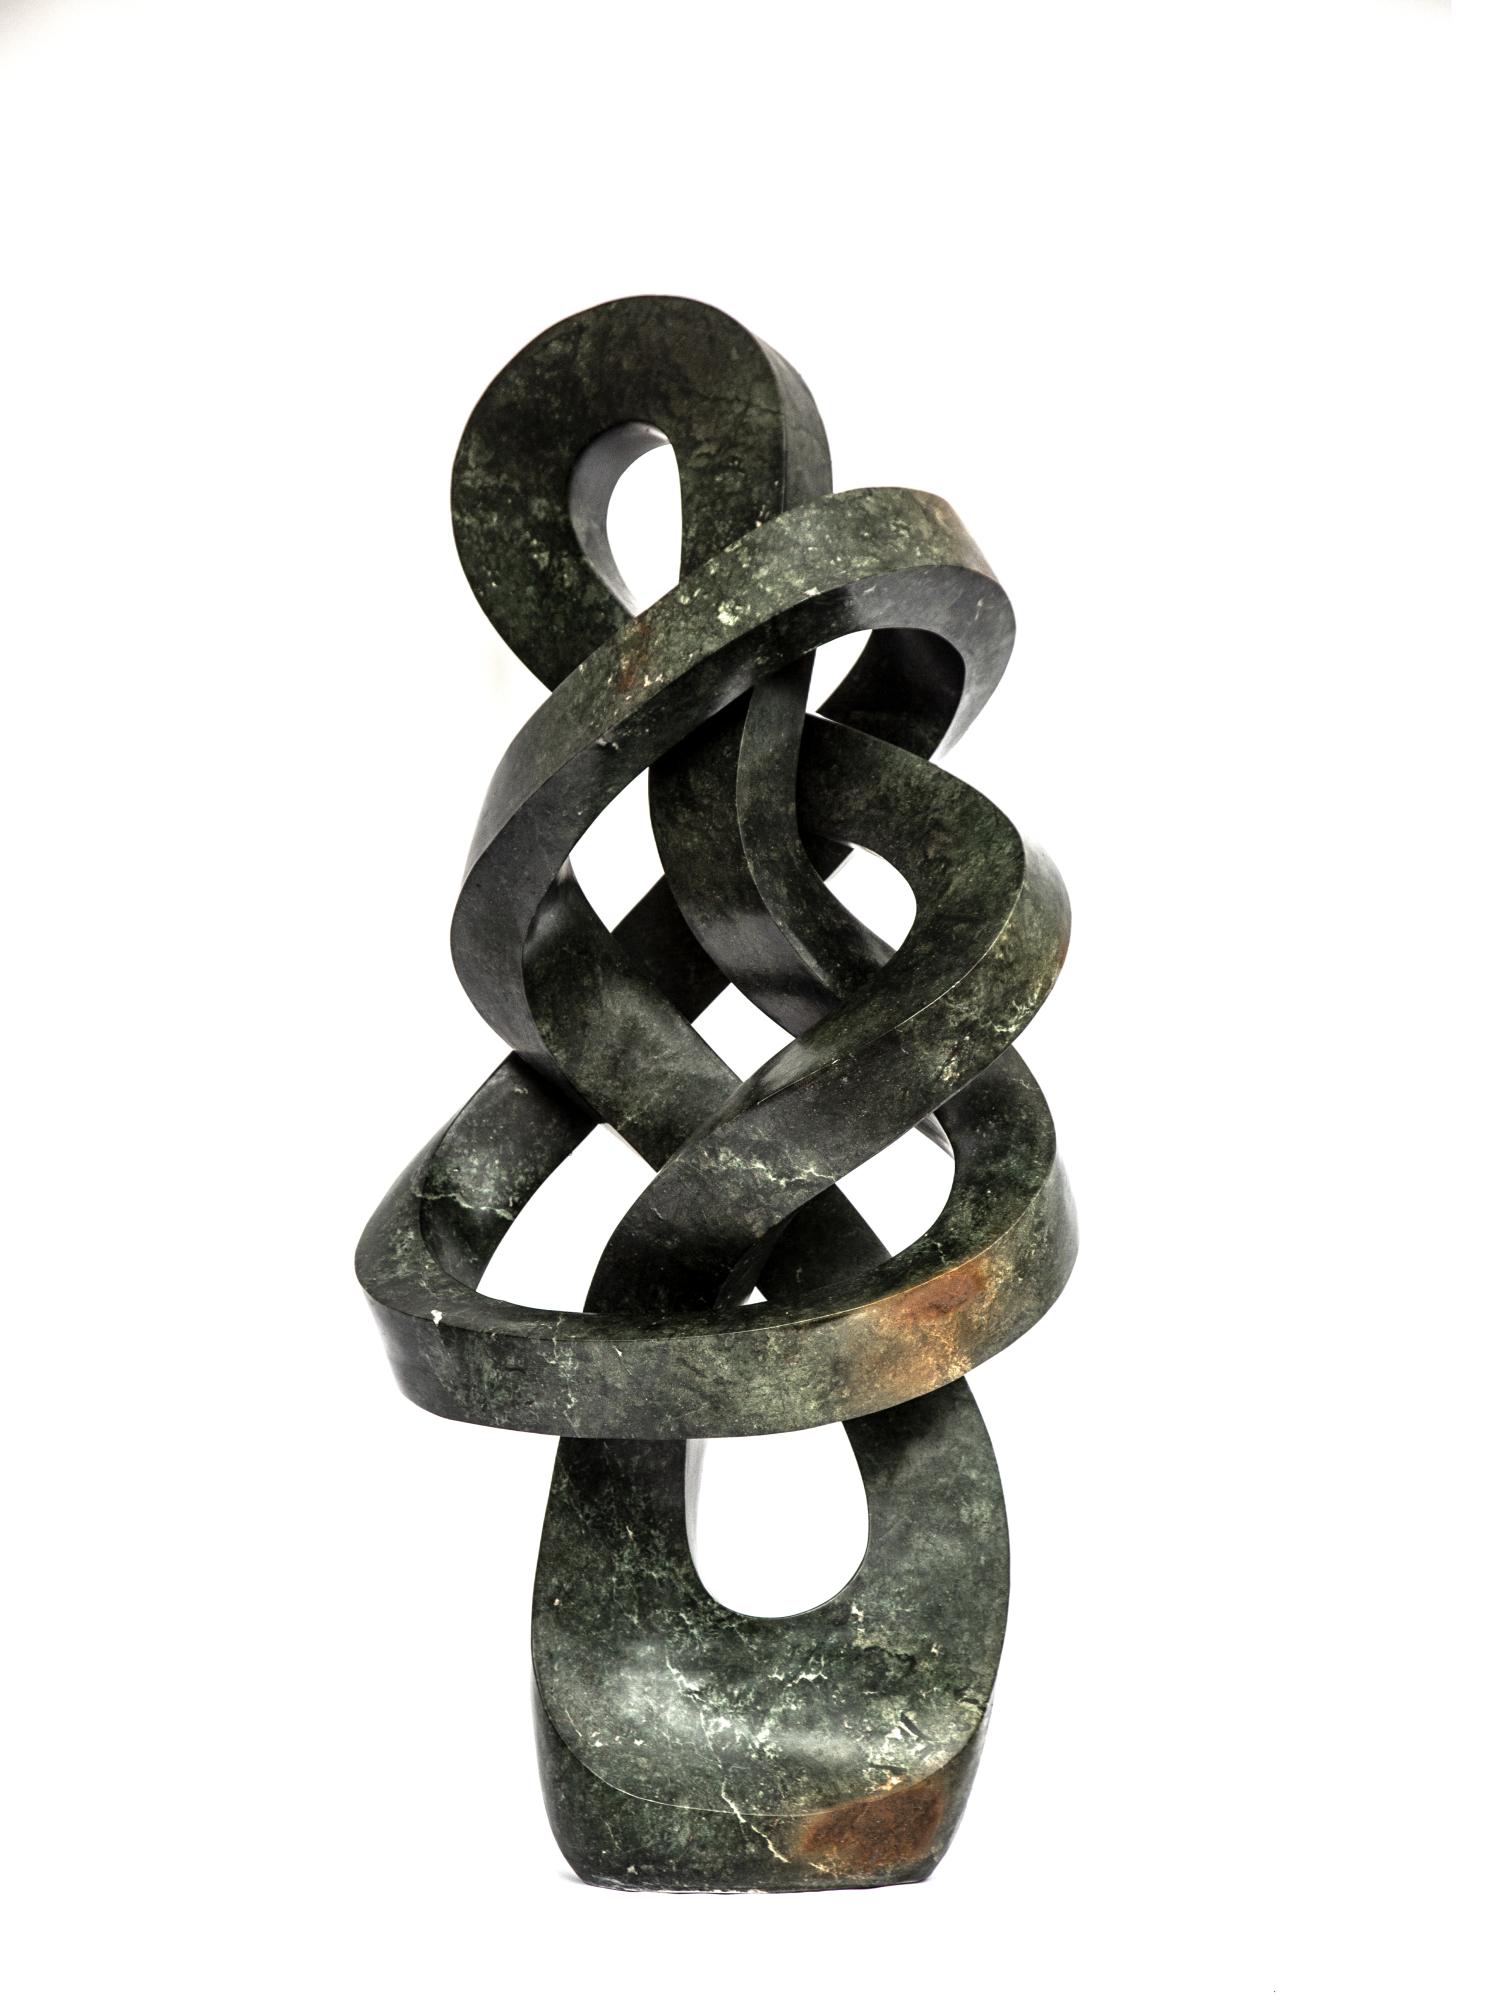 Sculpture: Victor Matafi Play to your strength Springstone Signed Unqiue 160cm high by 76cm wide